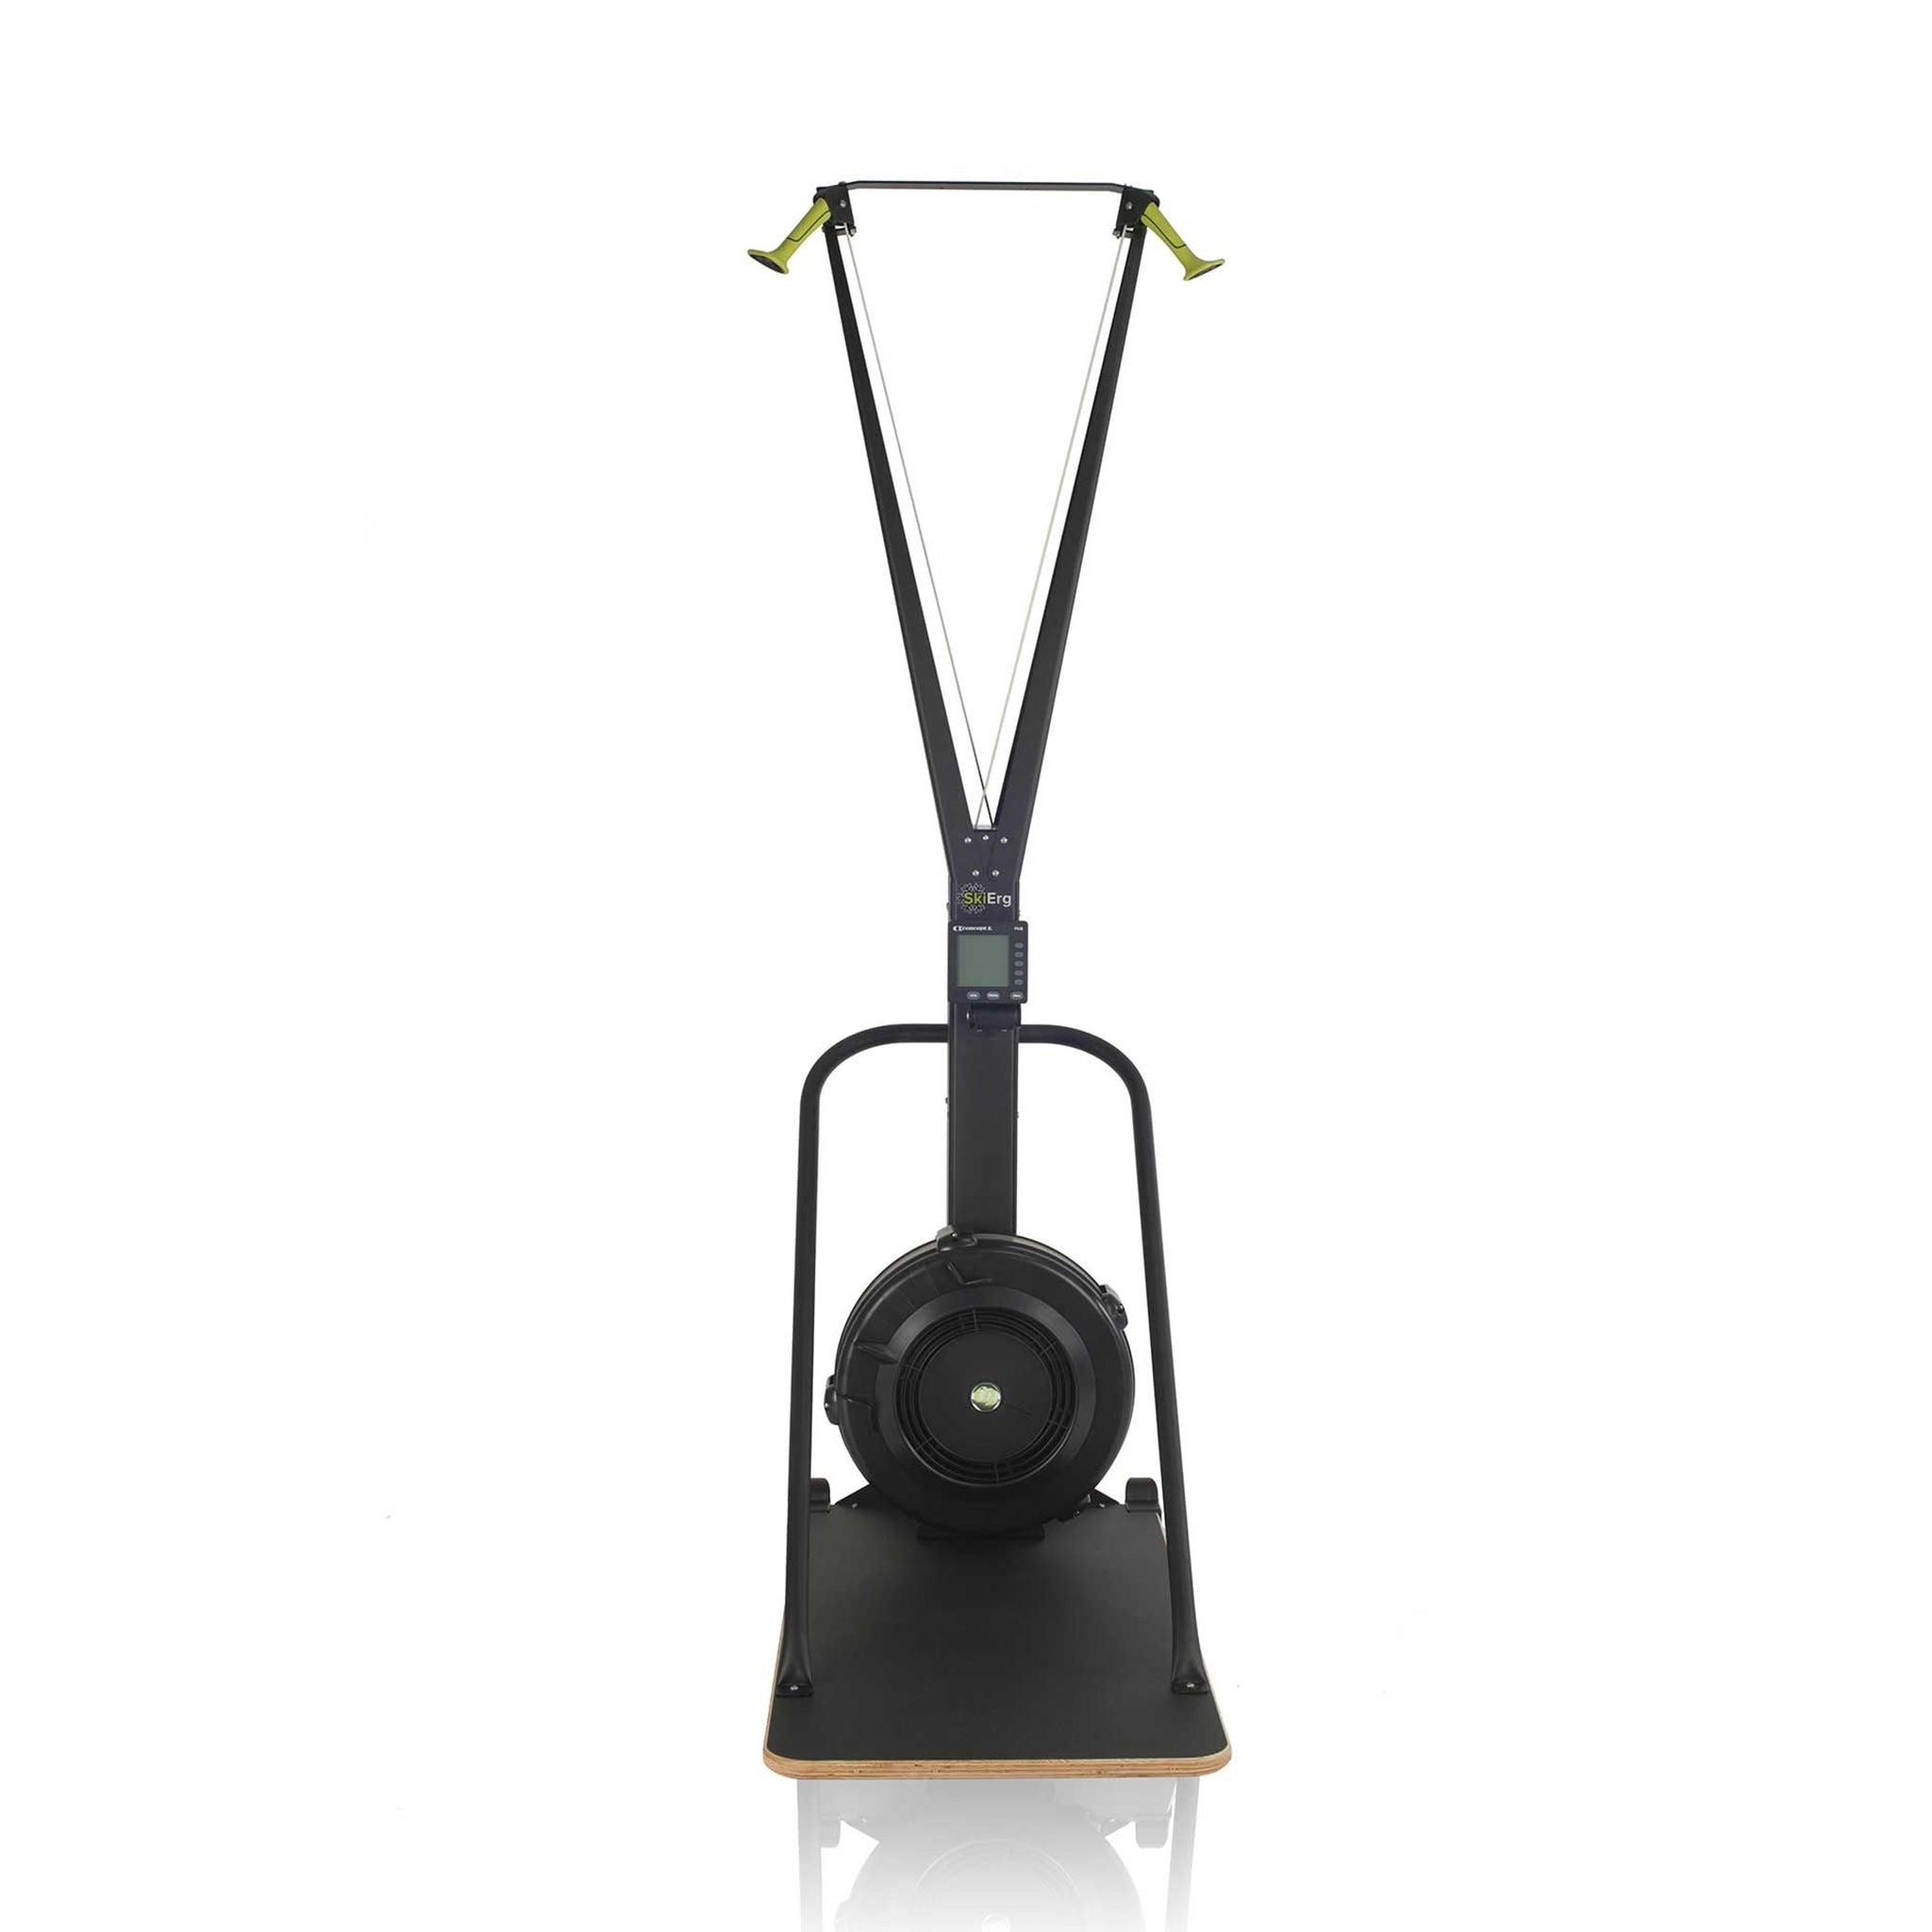 concept 2 ski erg with floor stand from the front